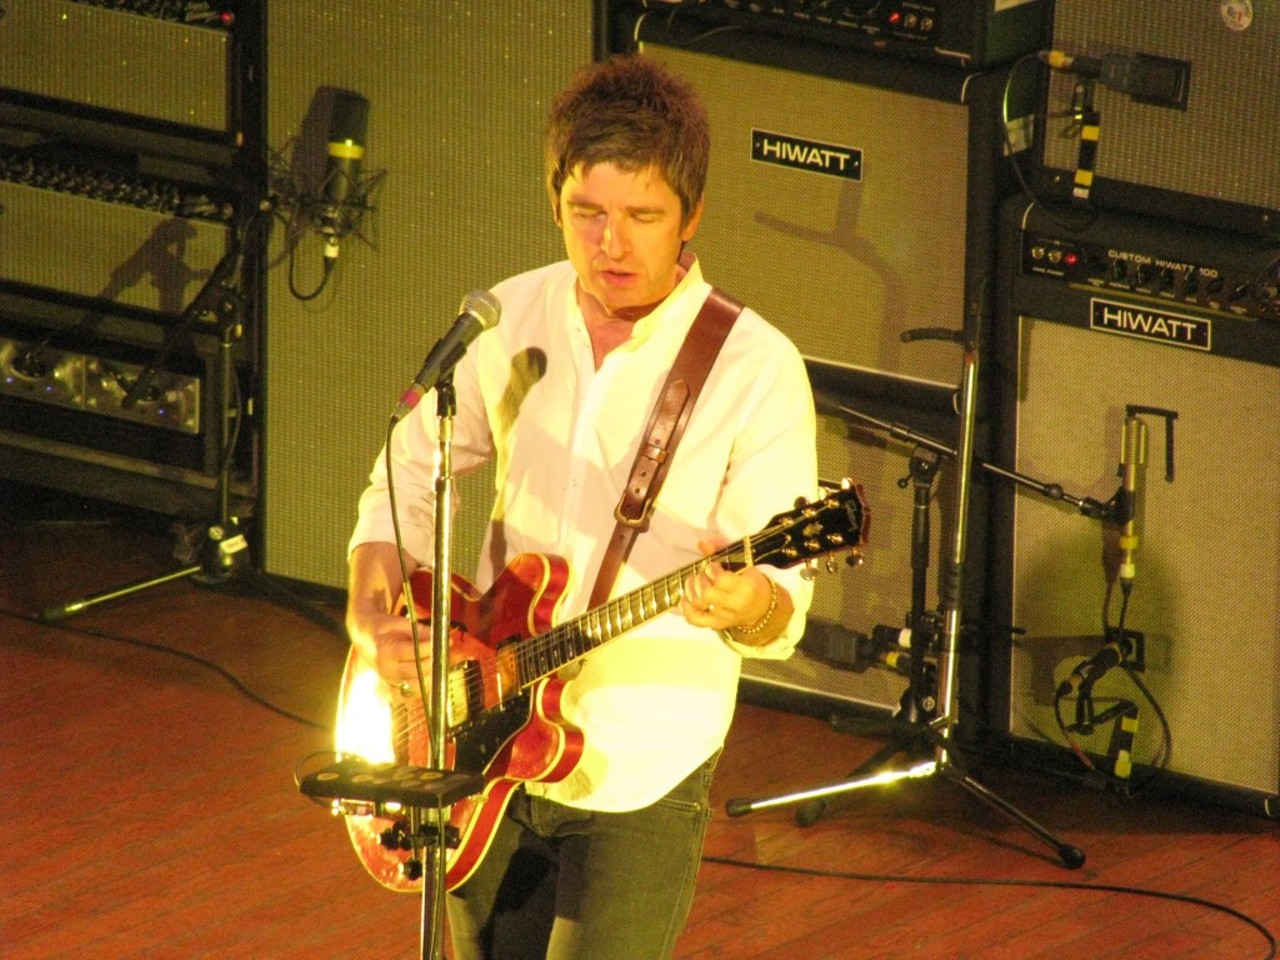 Noel Gallagher's High Flying Birds Performing at House of Blues